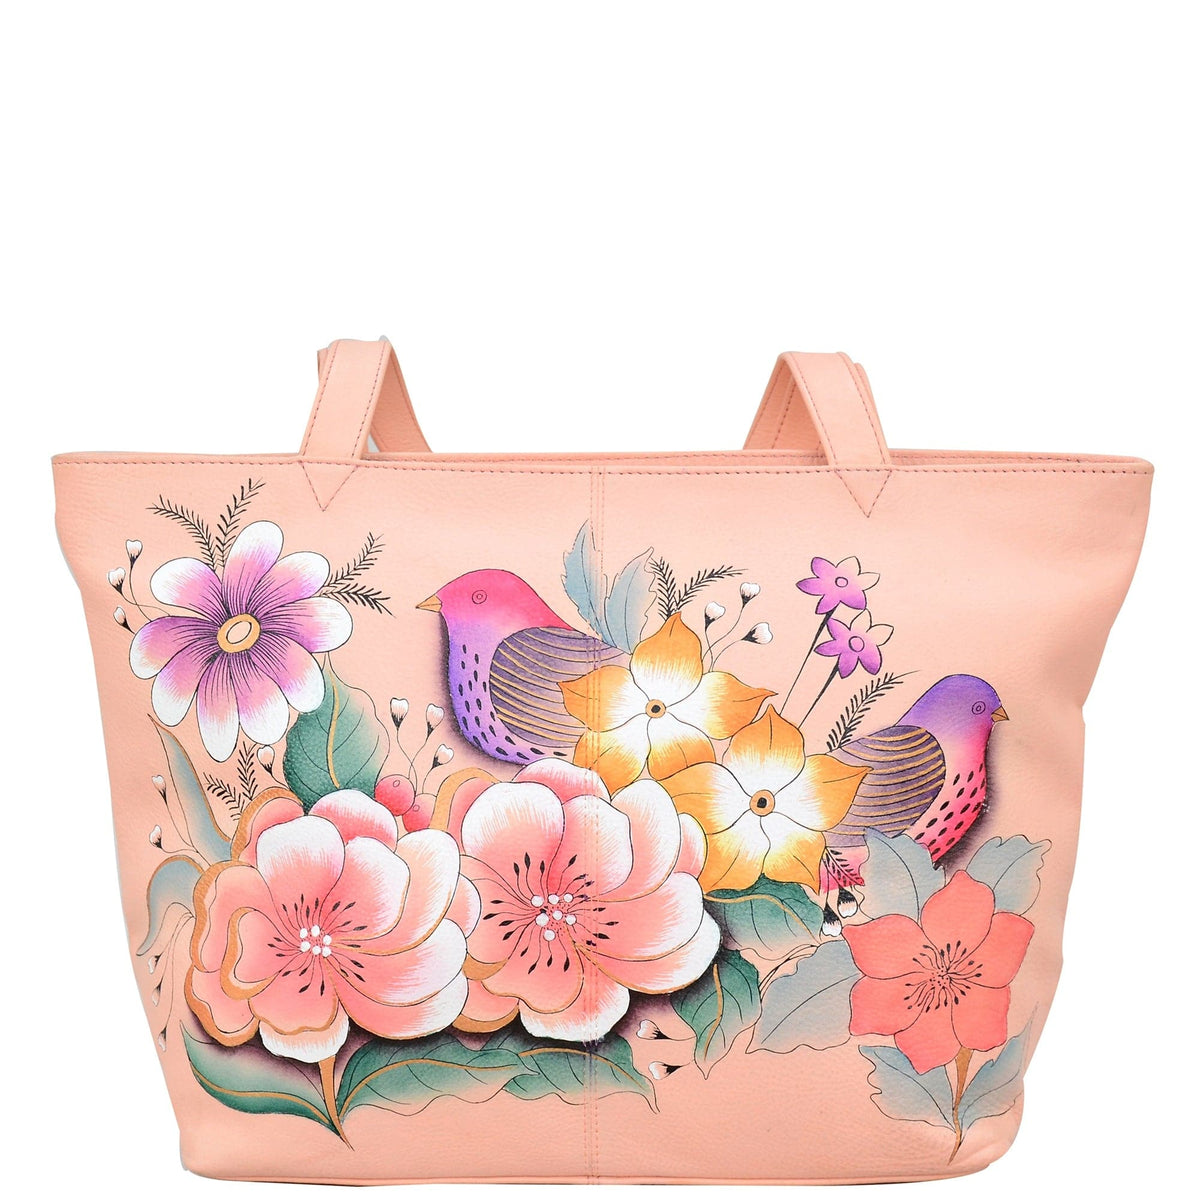 Anna by Anuschka style 8045, handpainted Large Tote. Vintage Garden painting in pink/peach color. Featuring inside zippered wall pocket, Fits Laptop.